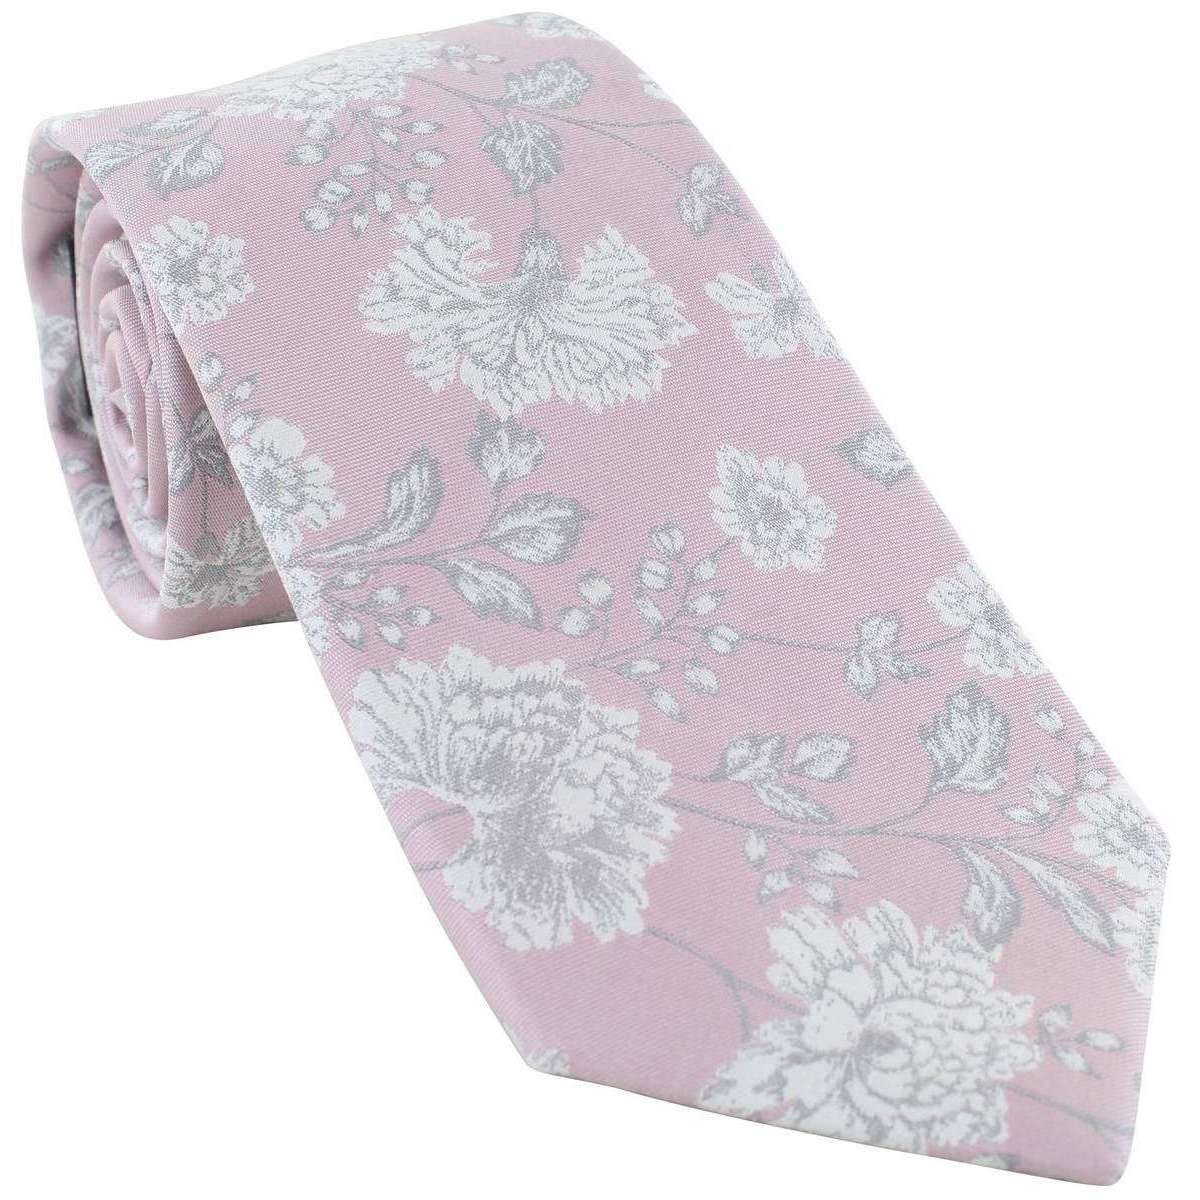 Michelsons of London Climbing Spring Floral Silk Tie - Dusty Pink/Silver